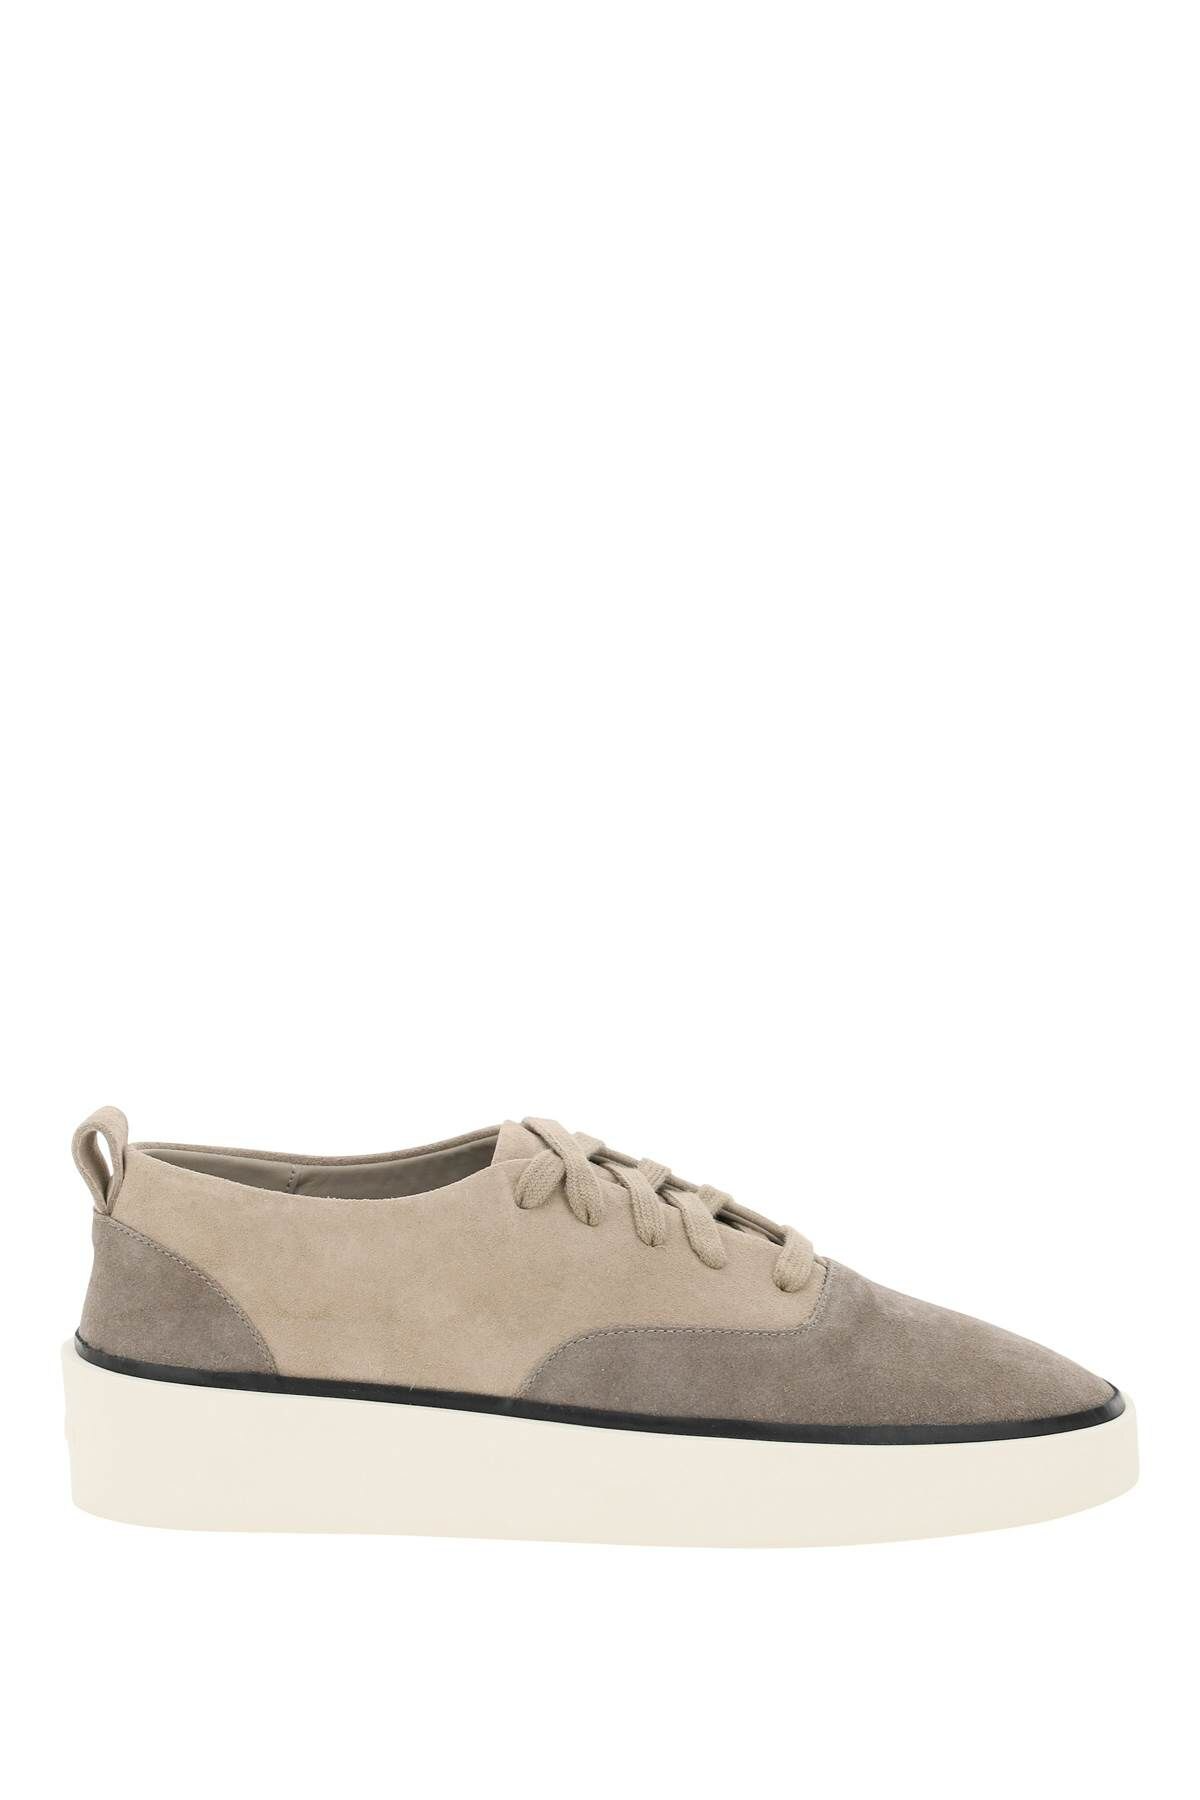 Fear Of God 101 Taupe Suede Lace Up – STASHED